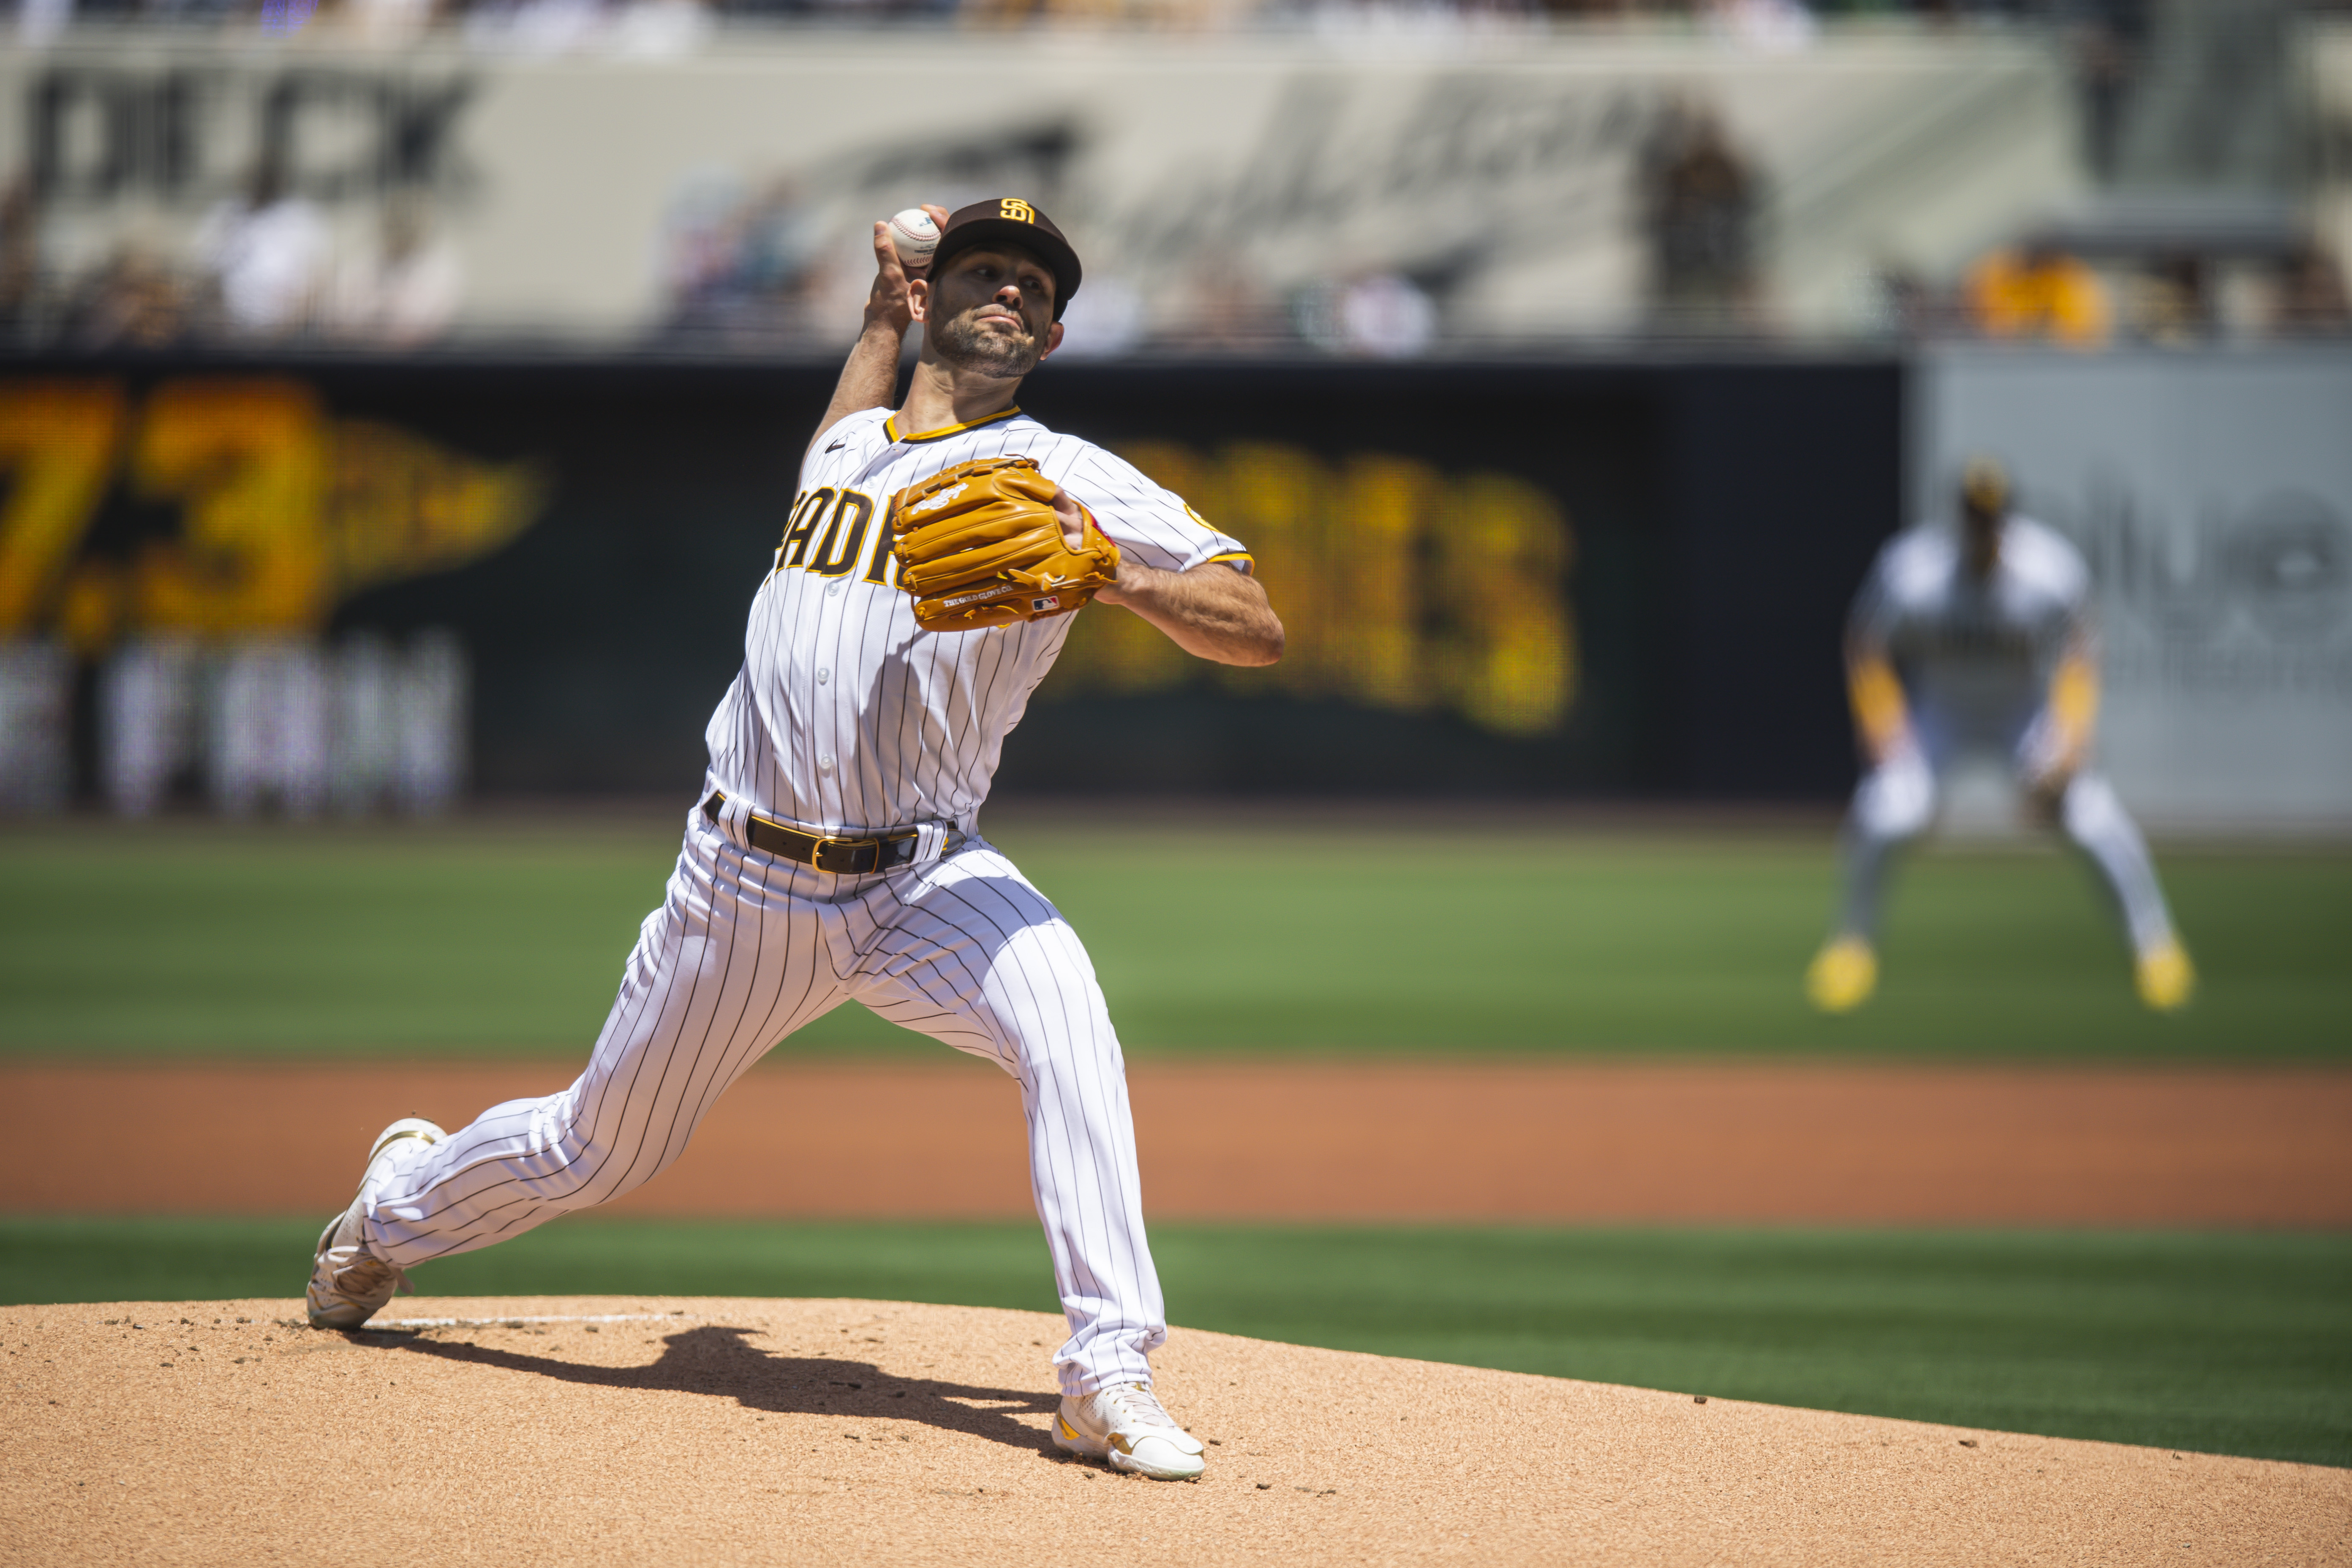 Nick Martinez opting out could mess up Padres' pitching staff